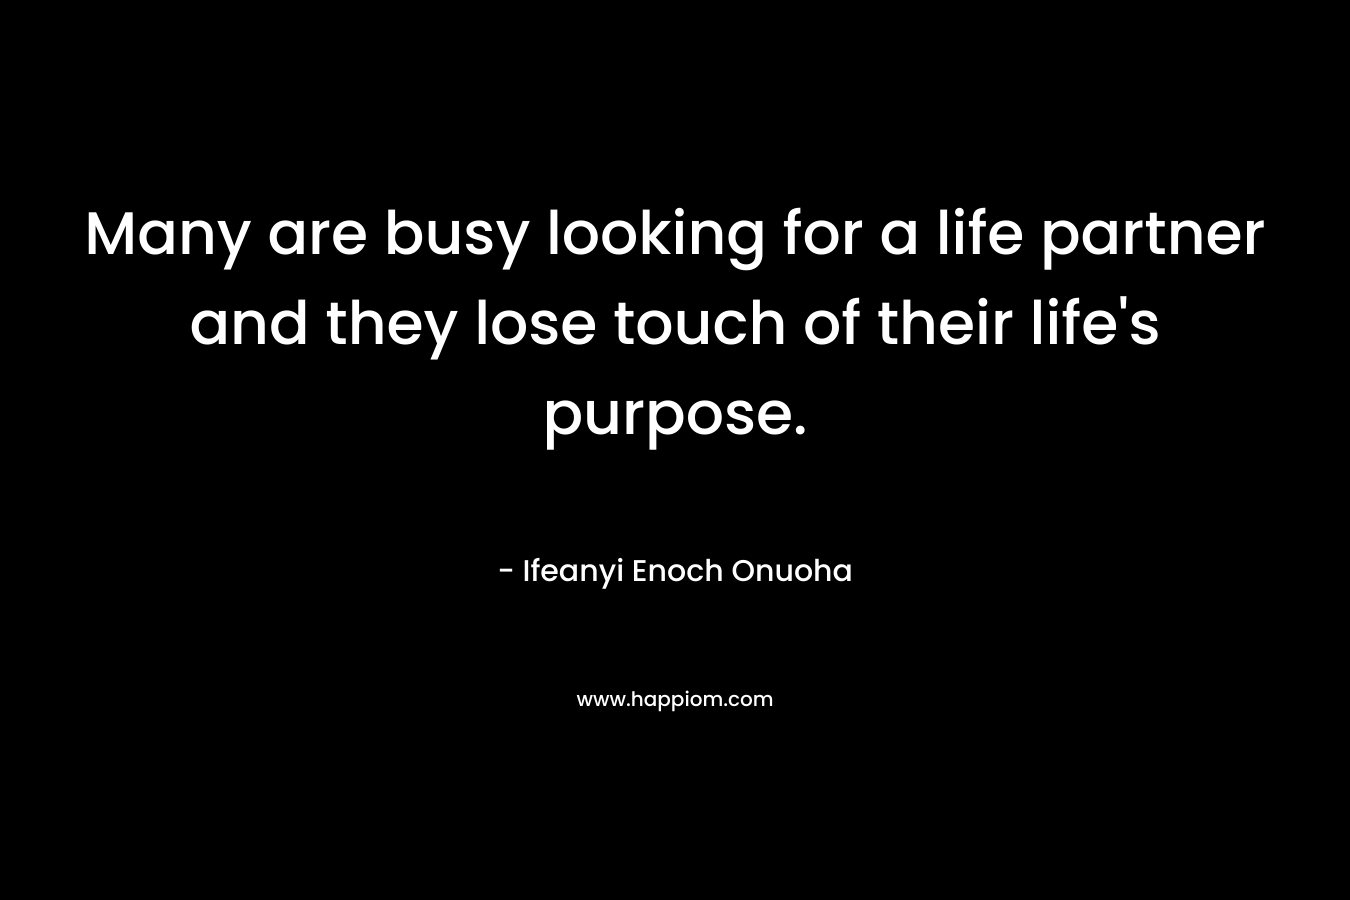 Many are busy looking for a life partner and they lose touch of their life's purpose.